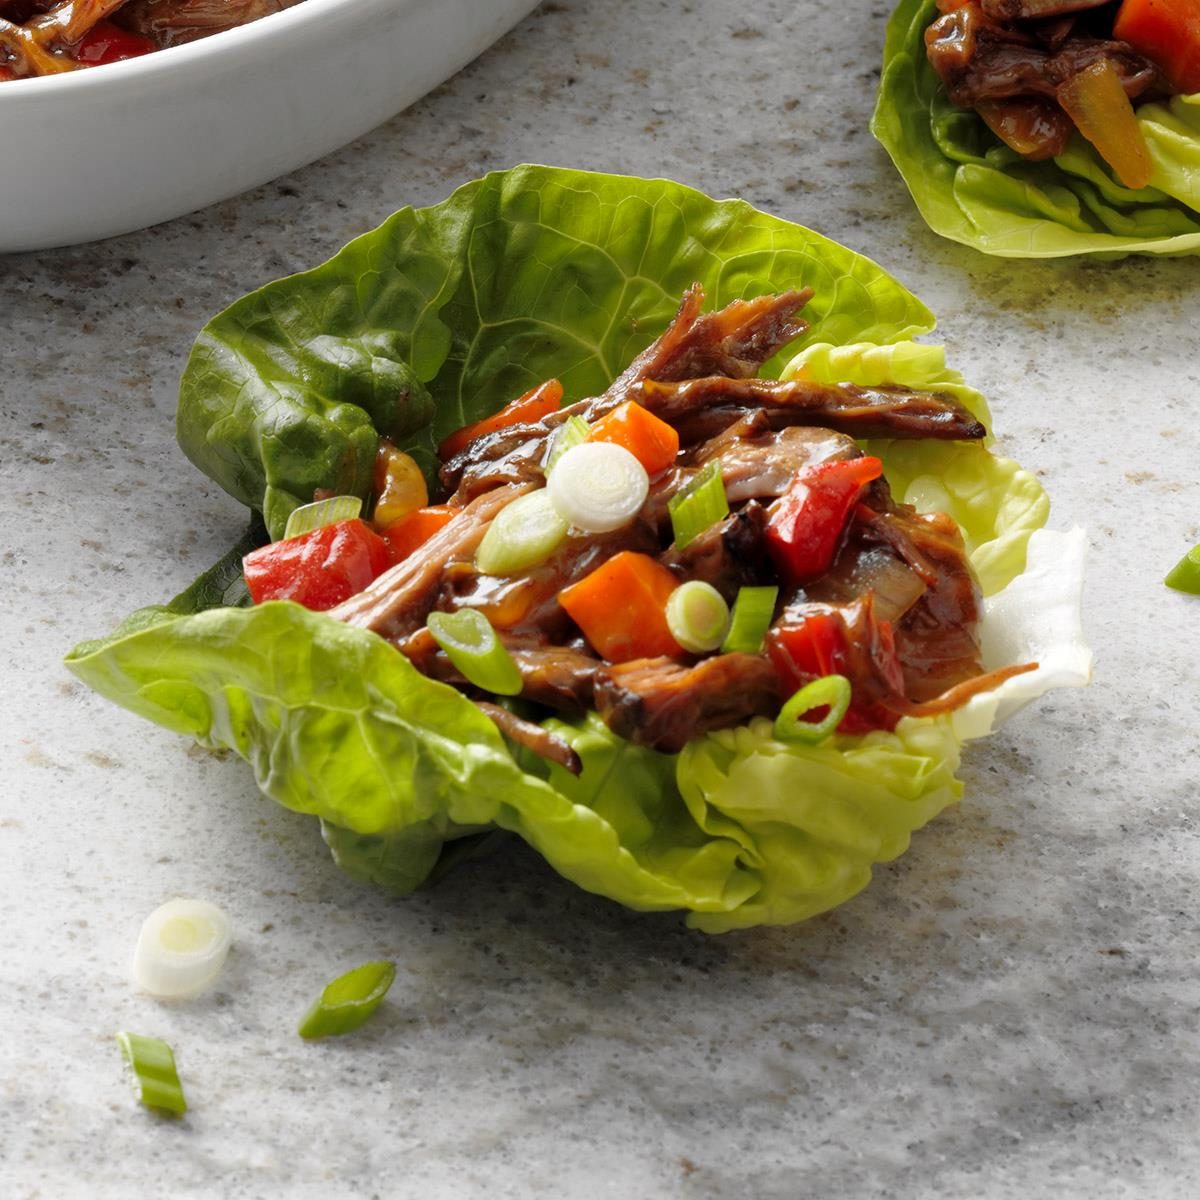 Day 3: Slow-Cooker Shredded Beef Lettuce Cups